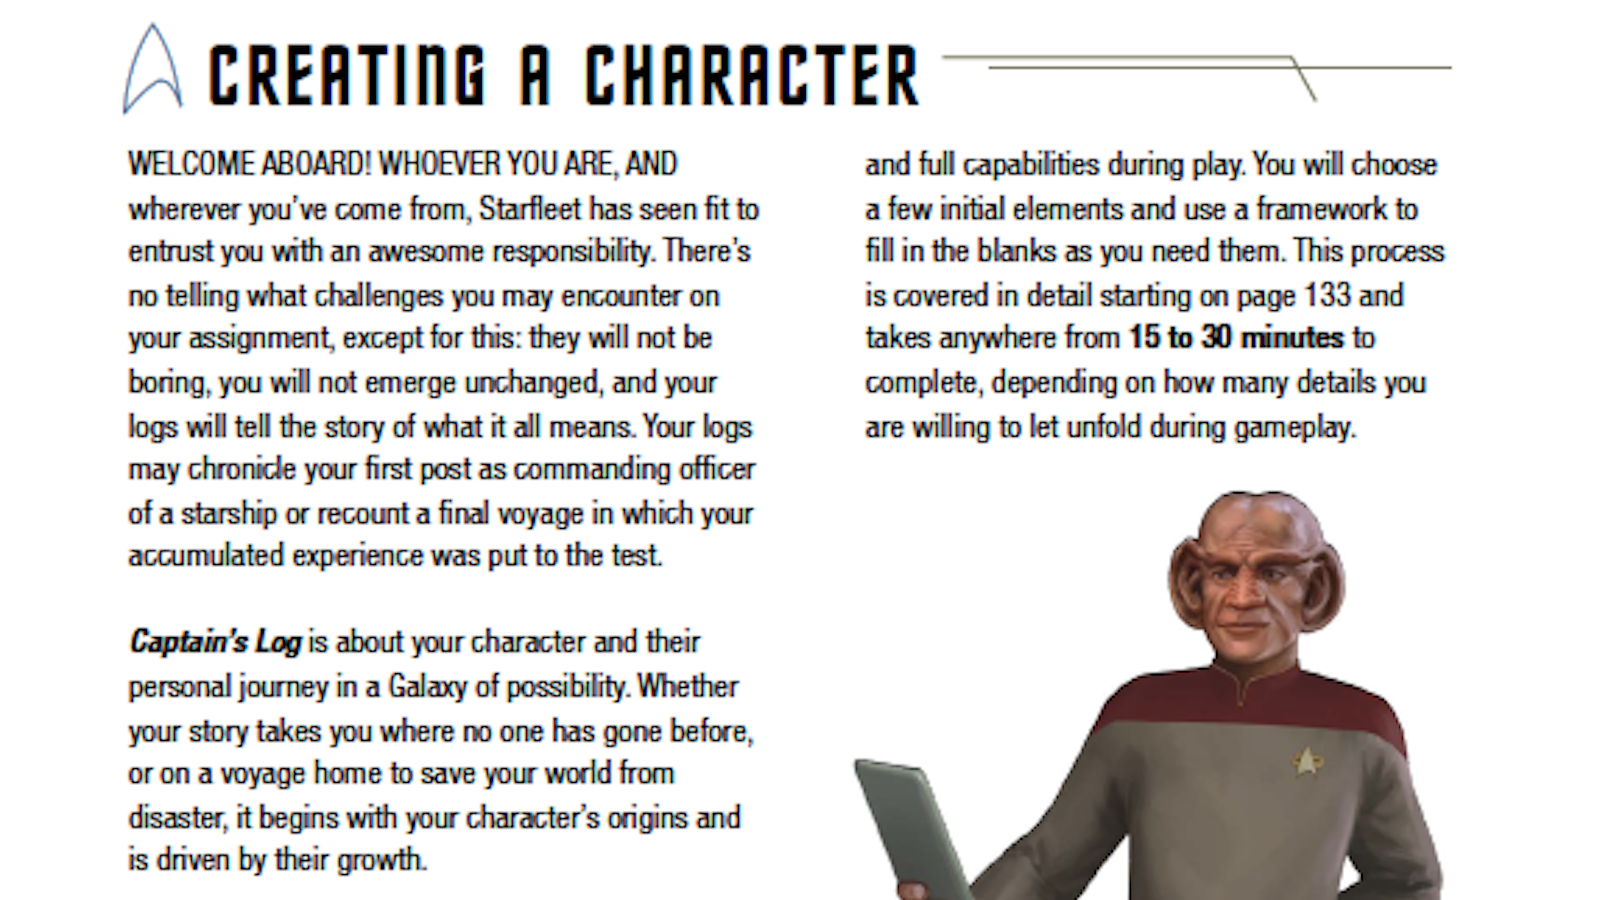 What You Need To Get Started On Your Star Trek Adventures